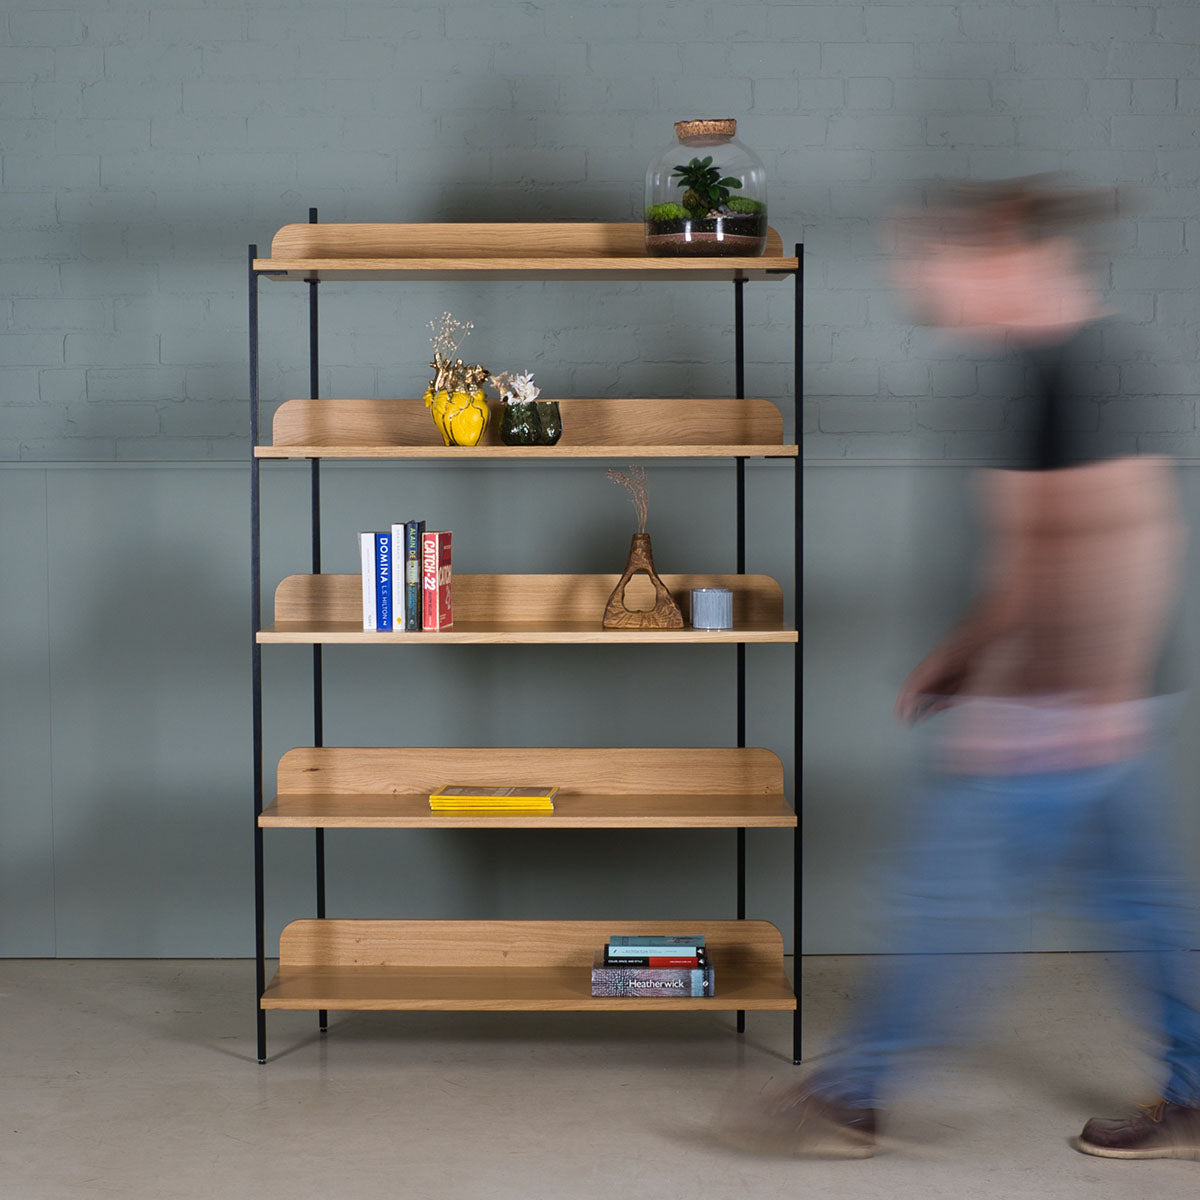 An image of the Oak Bookcase, Sia product available from Koda Studios